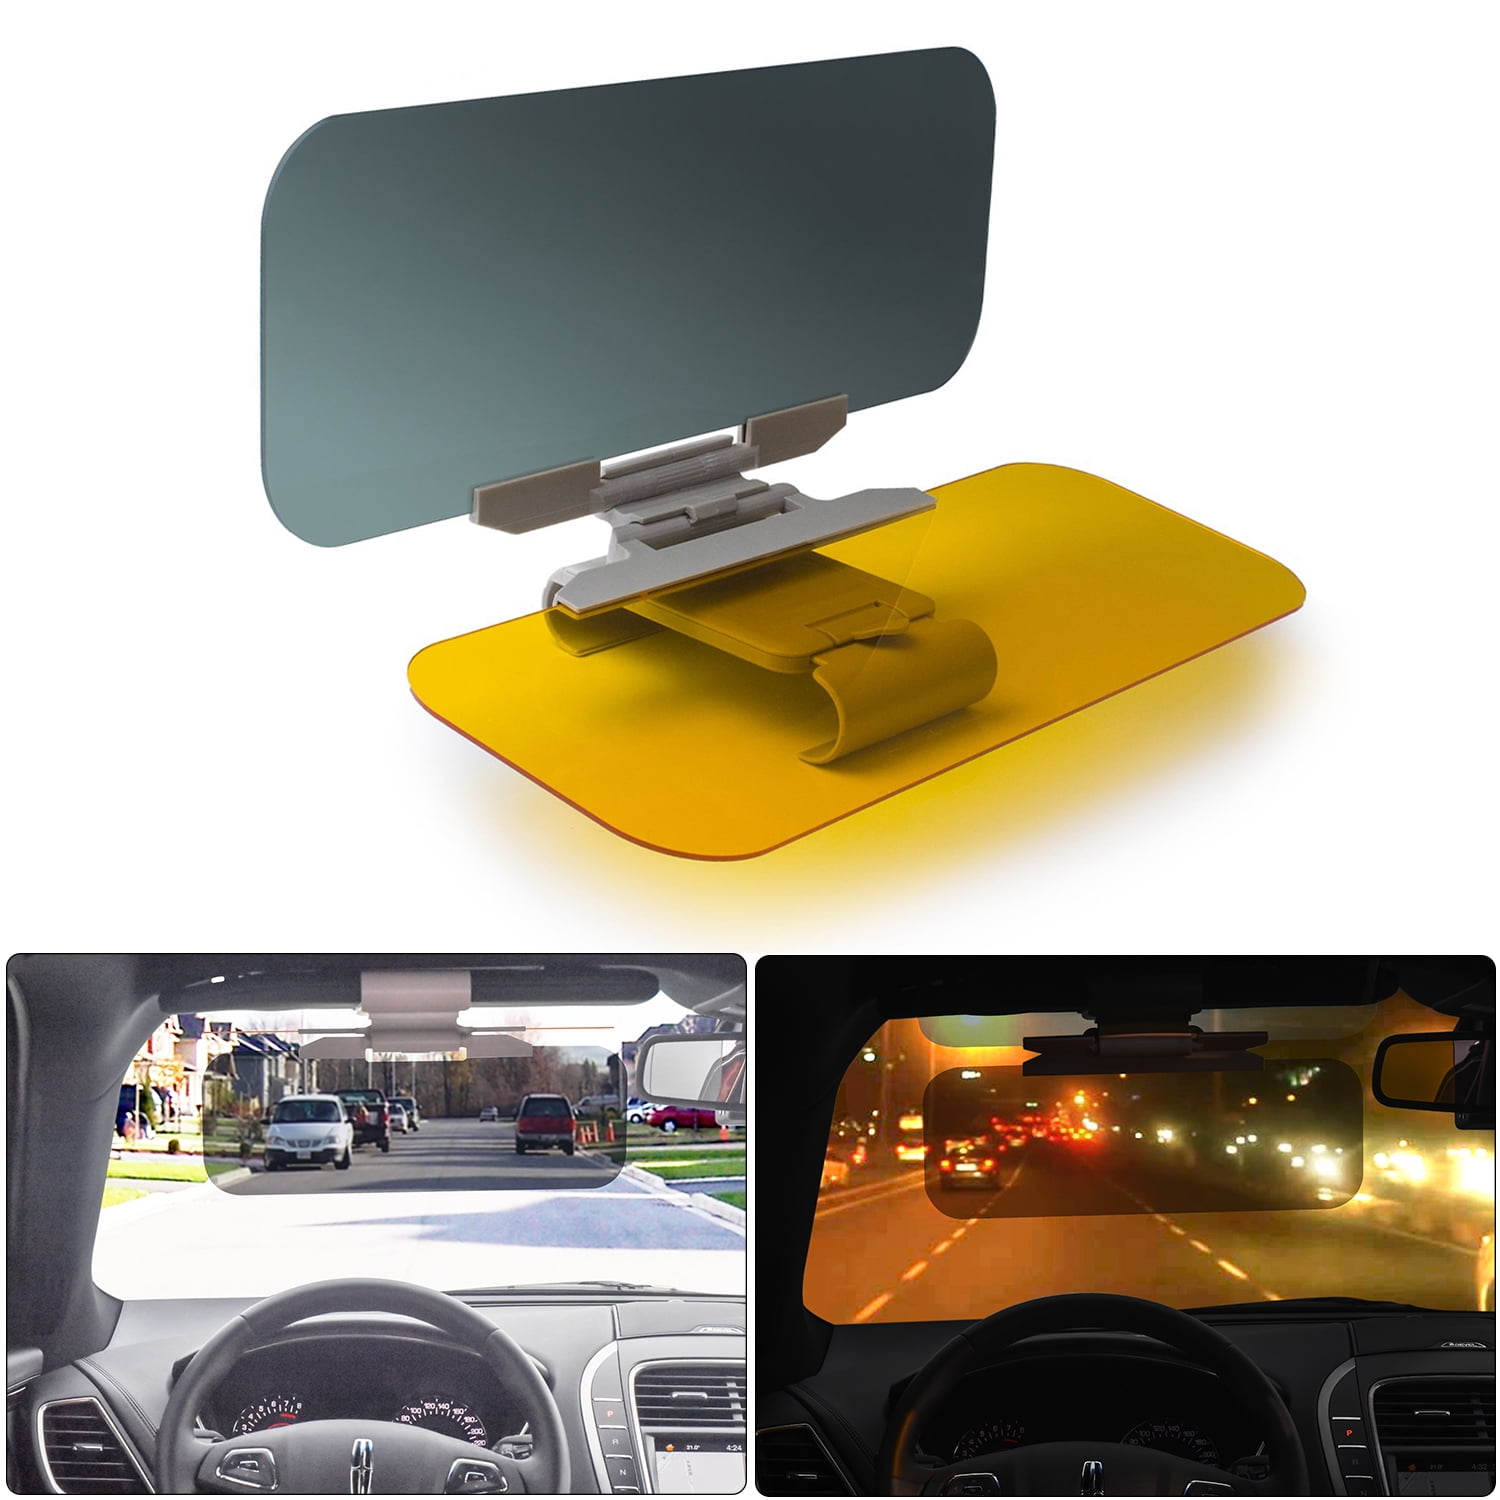 Mobi Lock Car Sun Visor Automobile Windshield Visor for Day and Night Pack of Two 